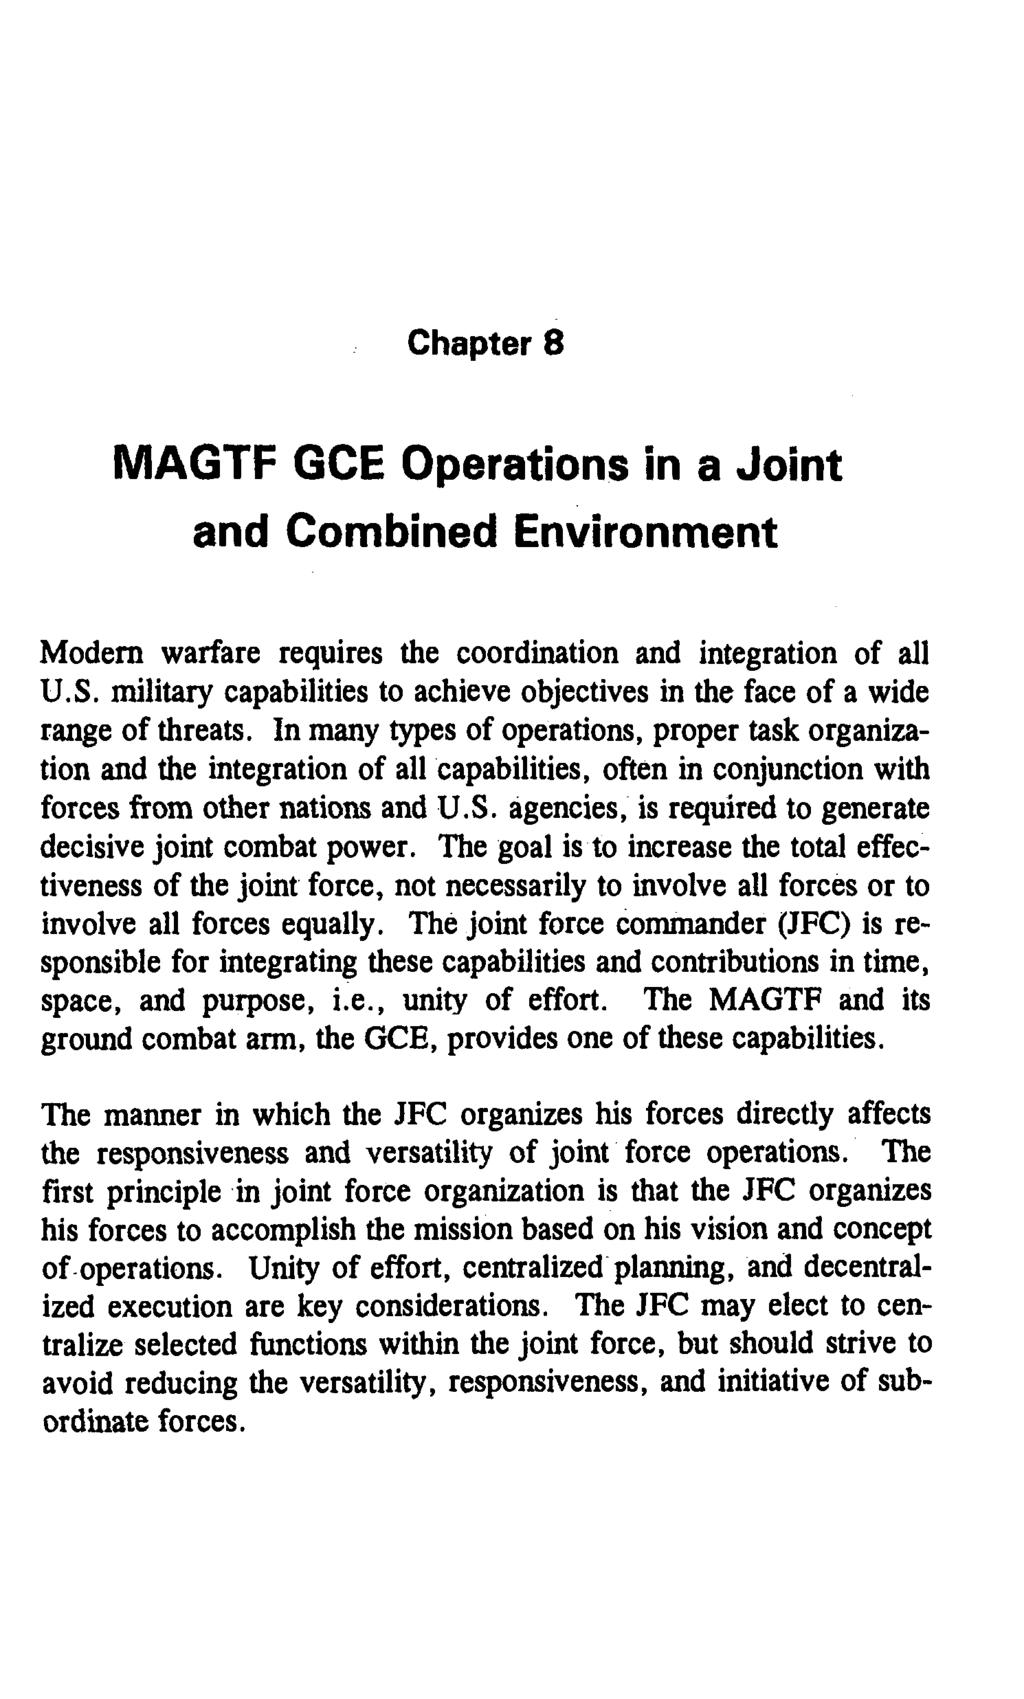 Chapter 8 MAGTF GCE Operations in a Joint and Combined Environment Modern warfare requires the coordination and integration of all U.S.